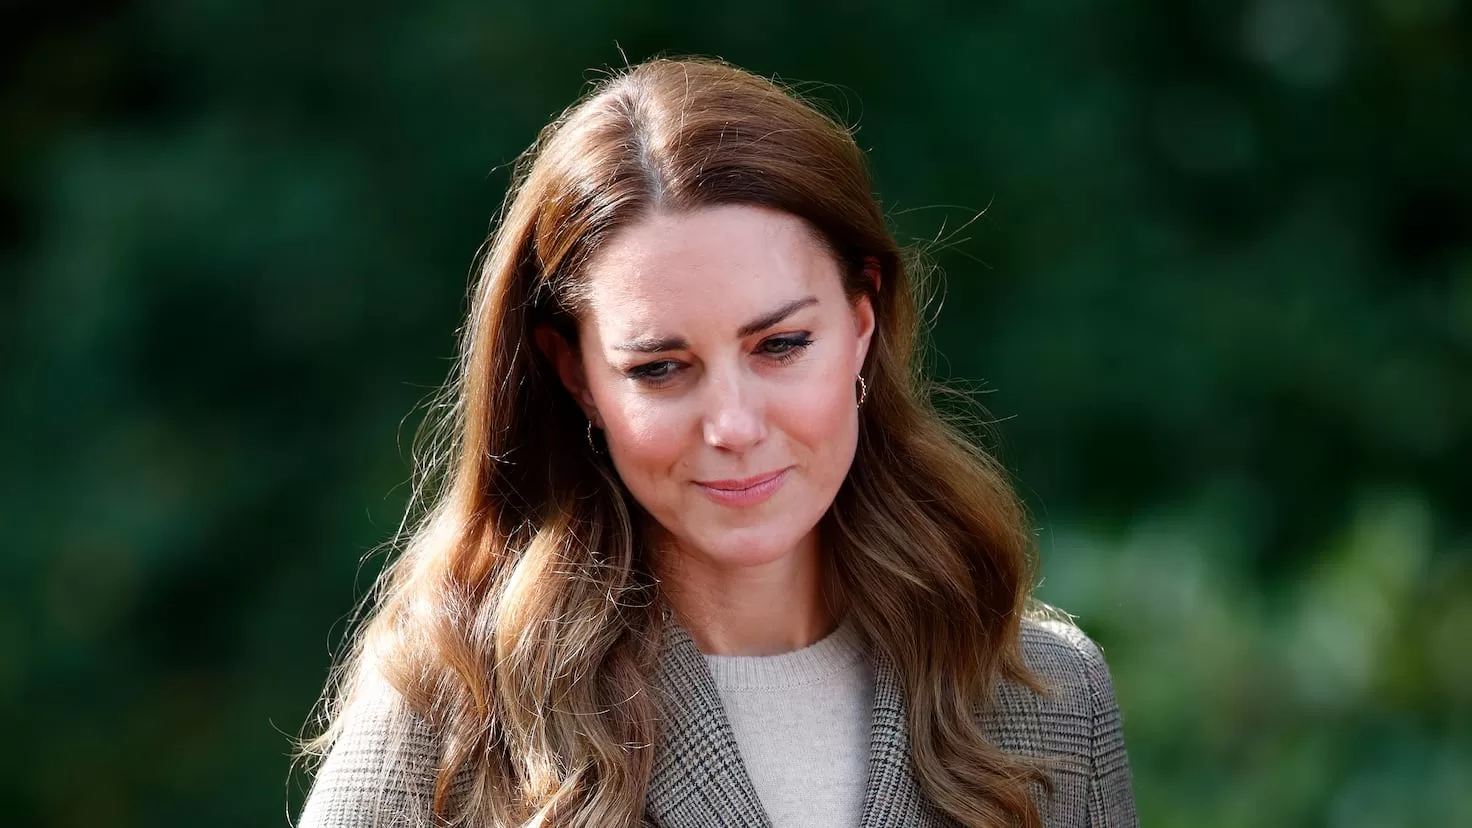 Kate Middleton, devastated by what happened with the photograph of her reappearance
